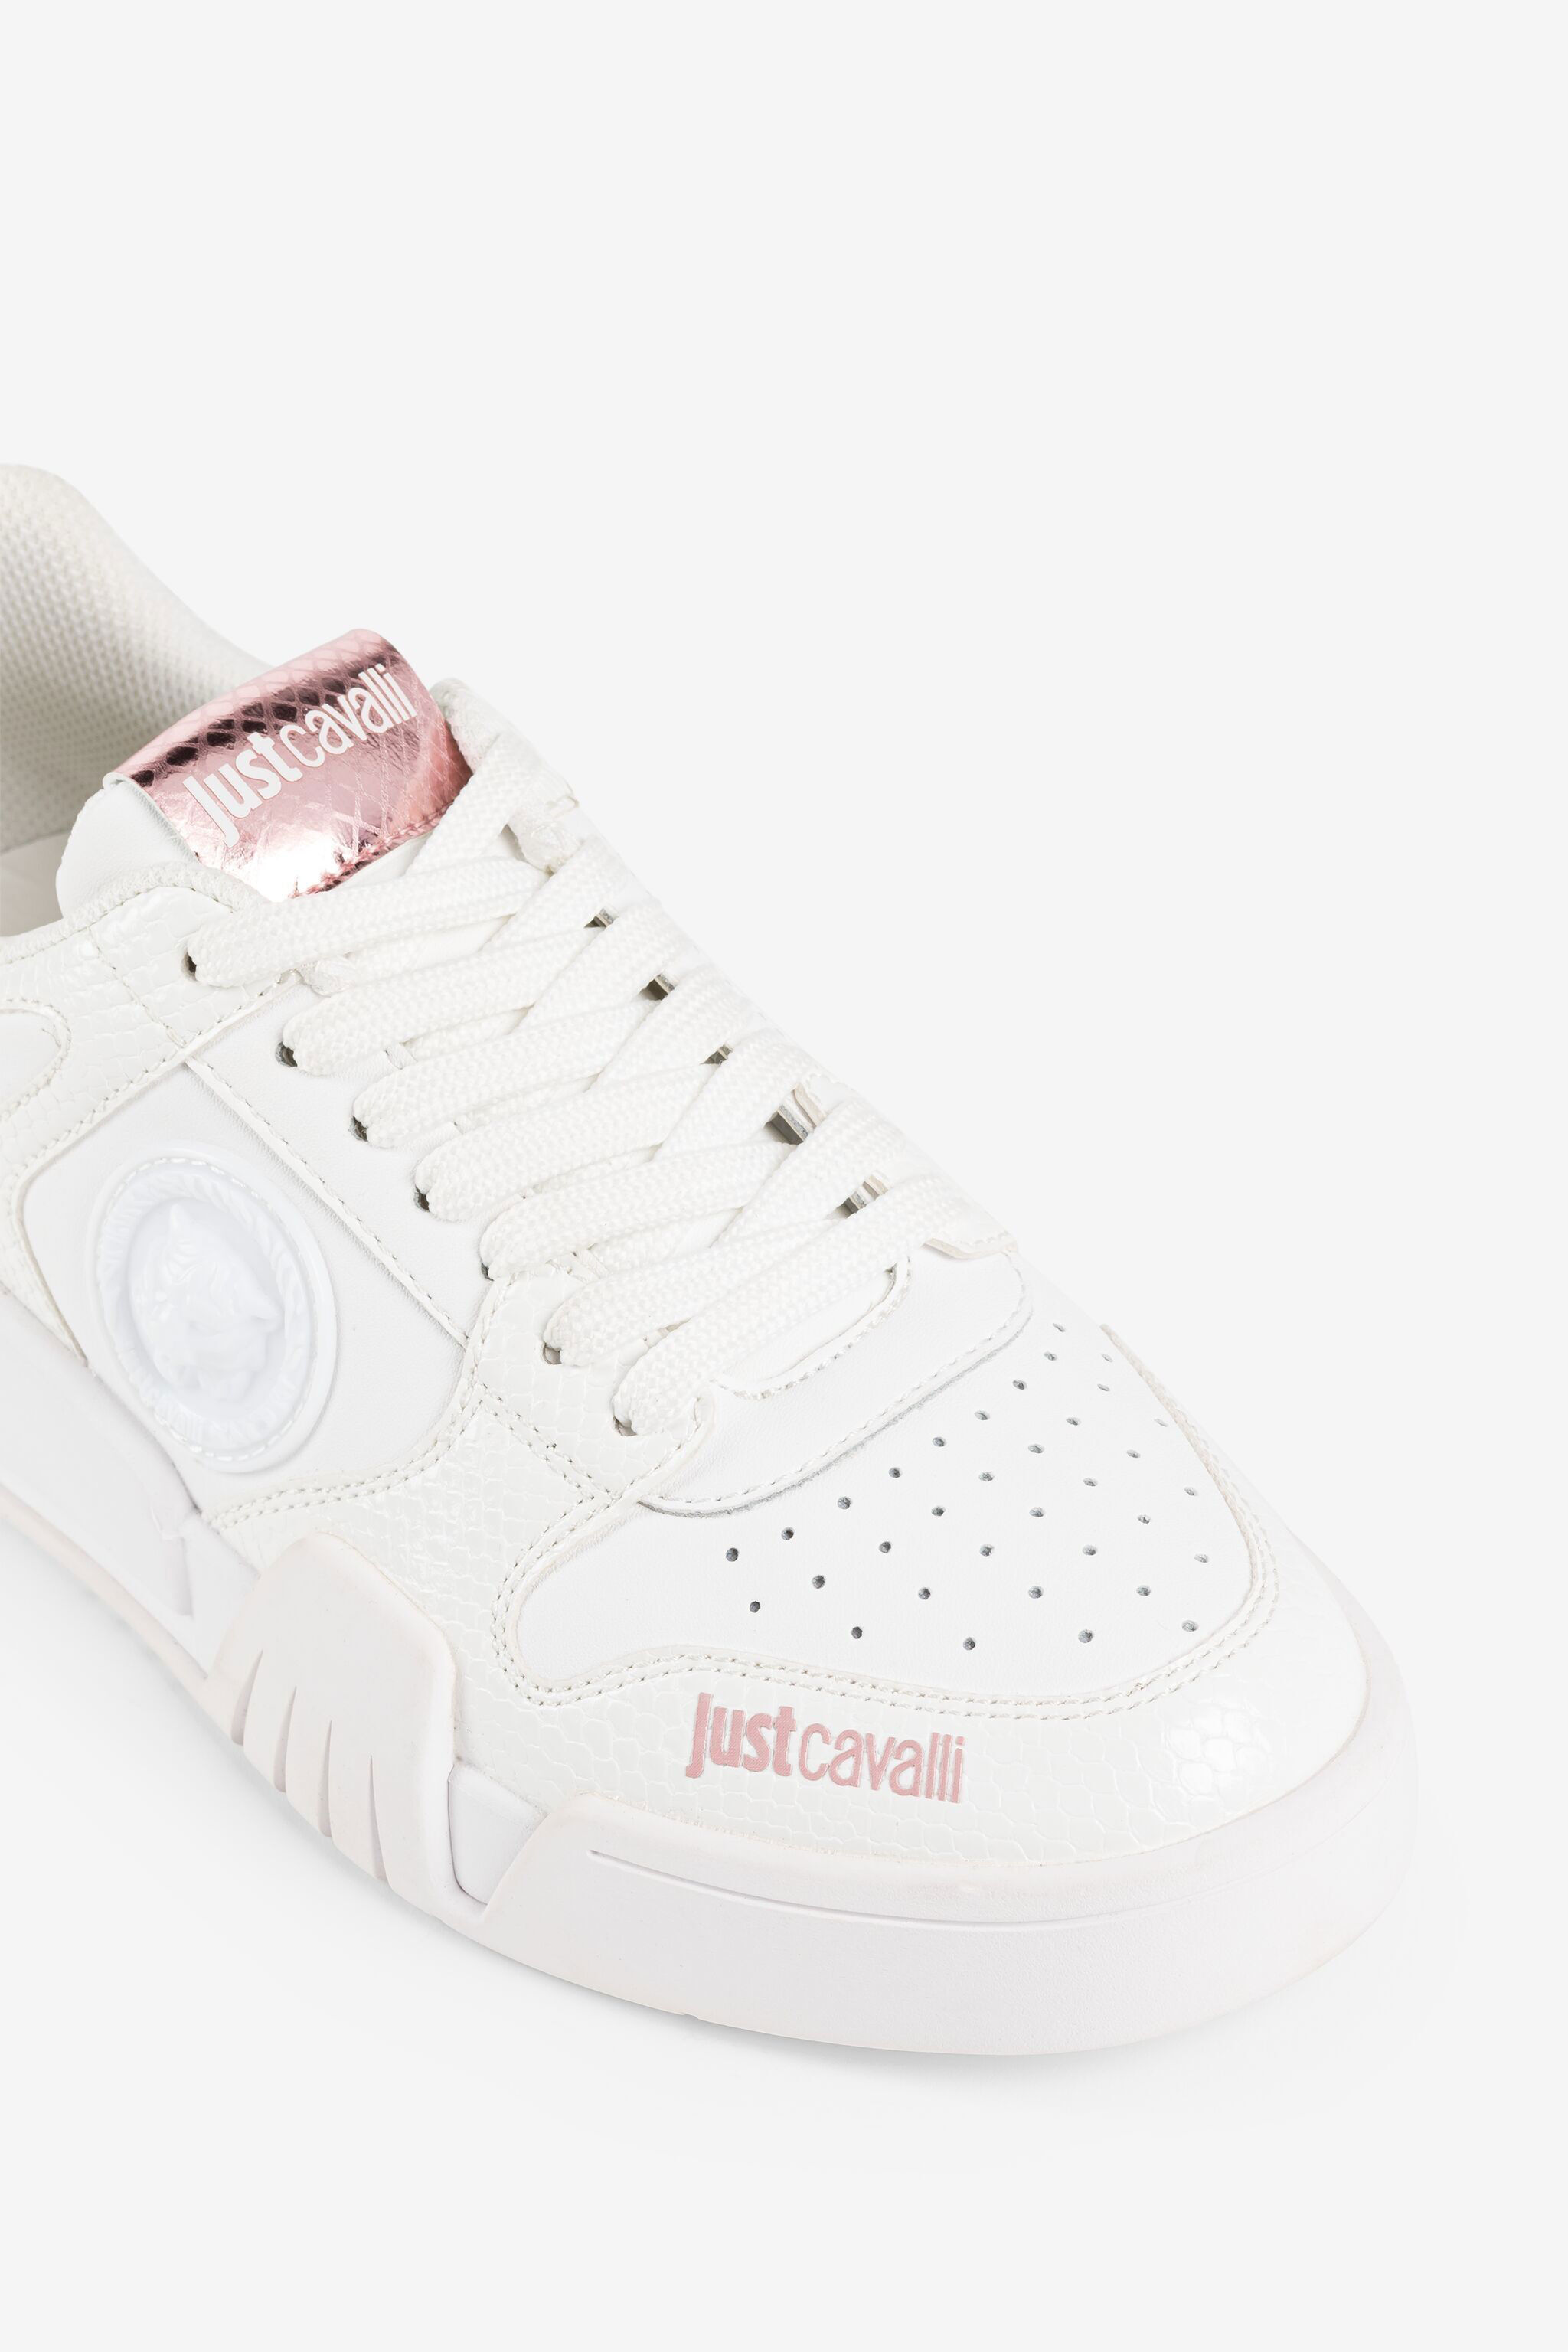 Just Cavalli Tiger Head Logo Sneakers | WHITE | Women | Just 